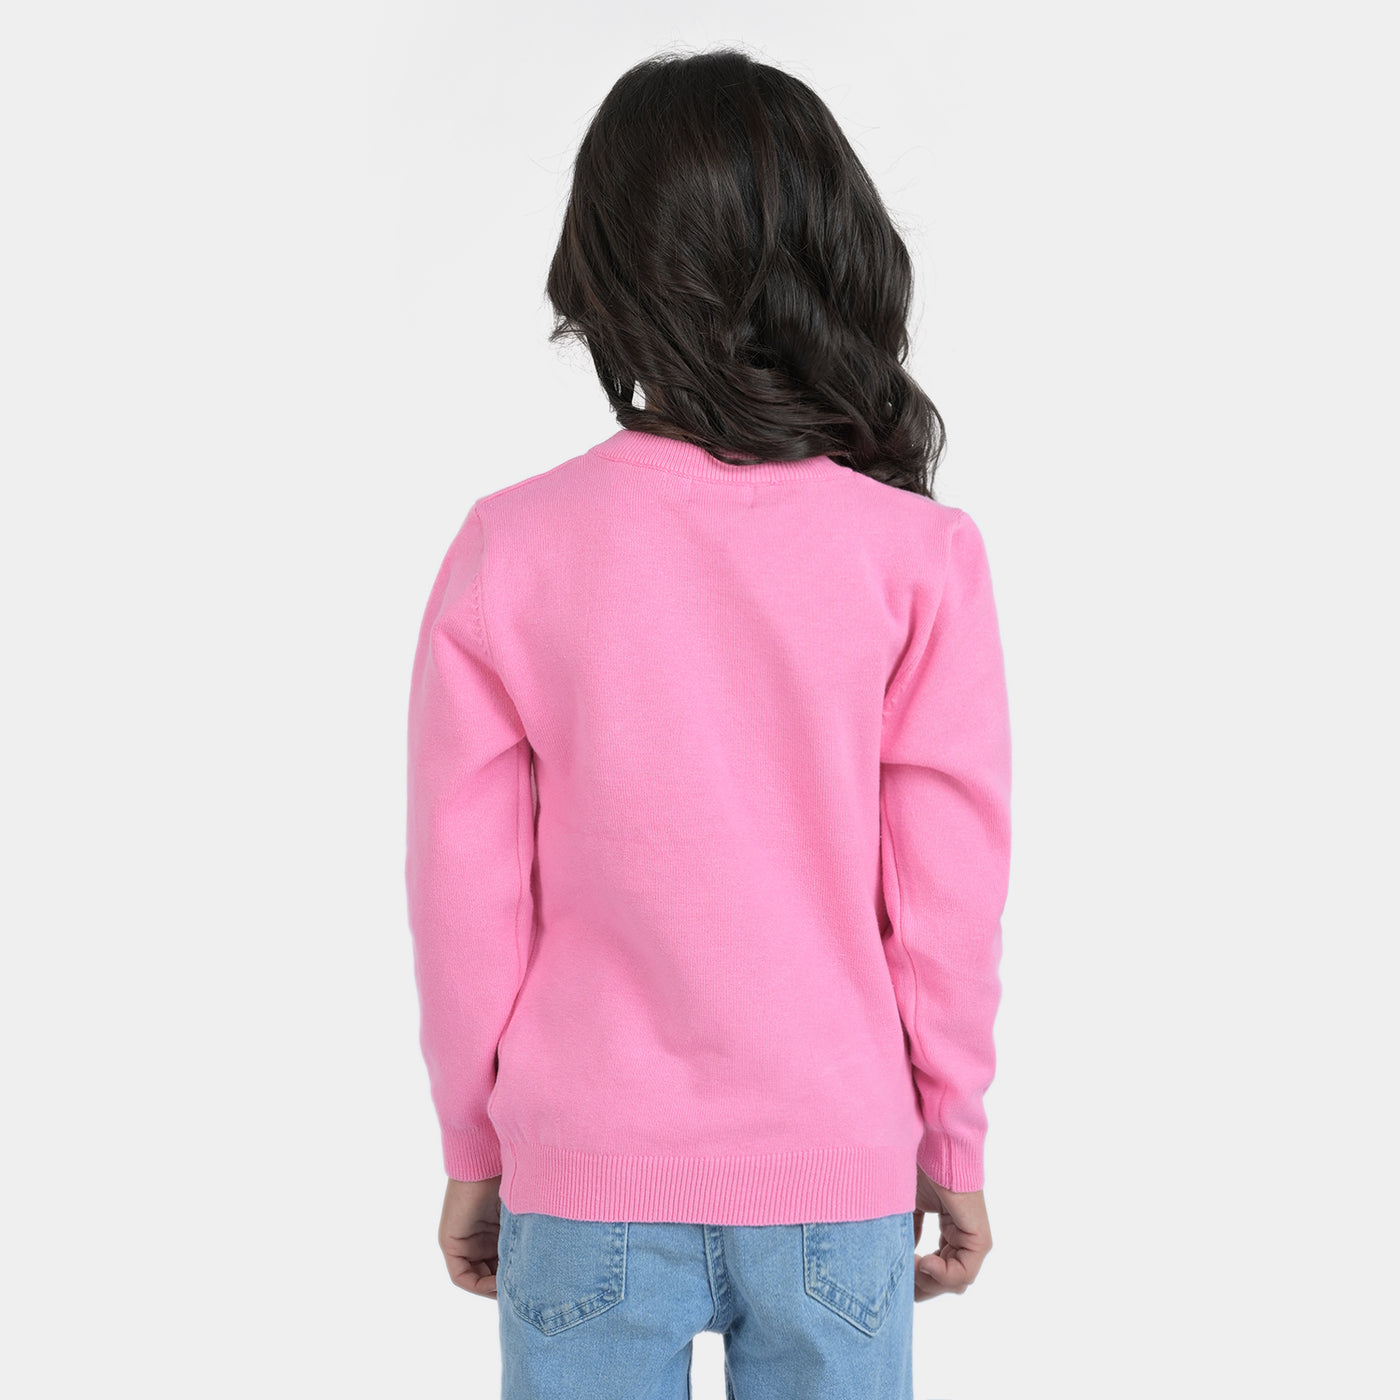 Girls Knitted Sweater Butterfly -Pink